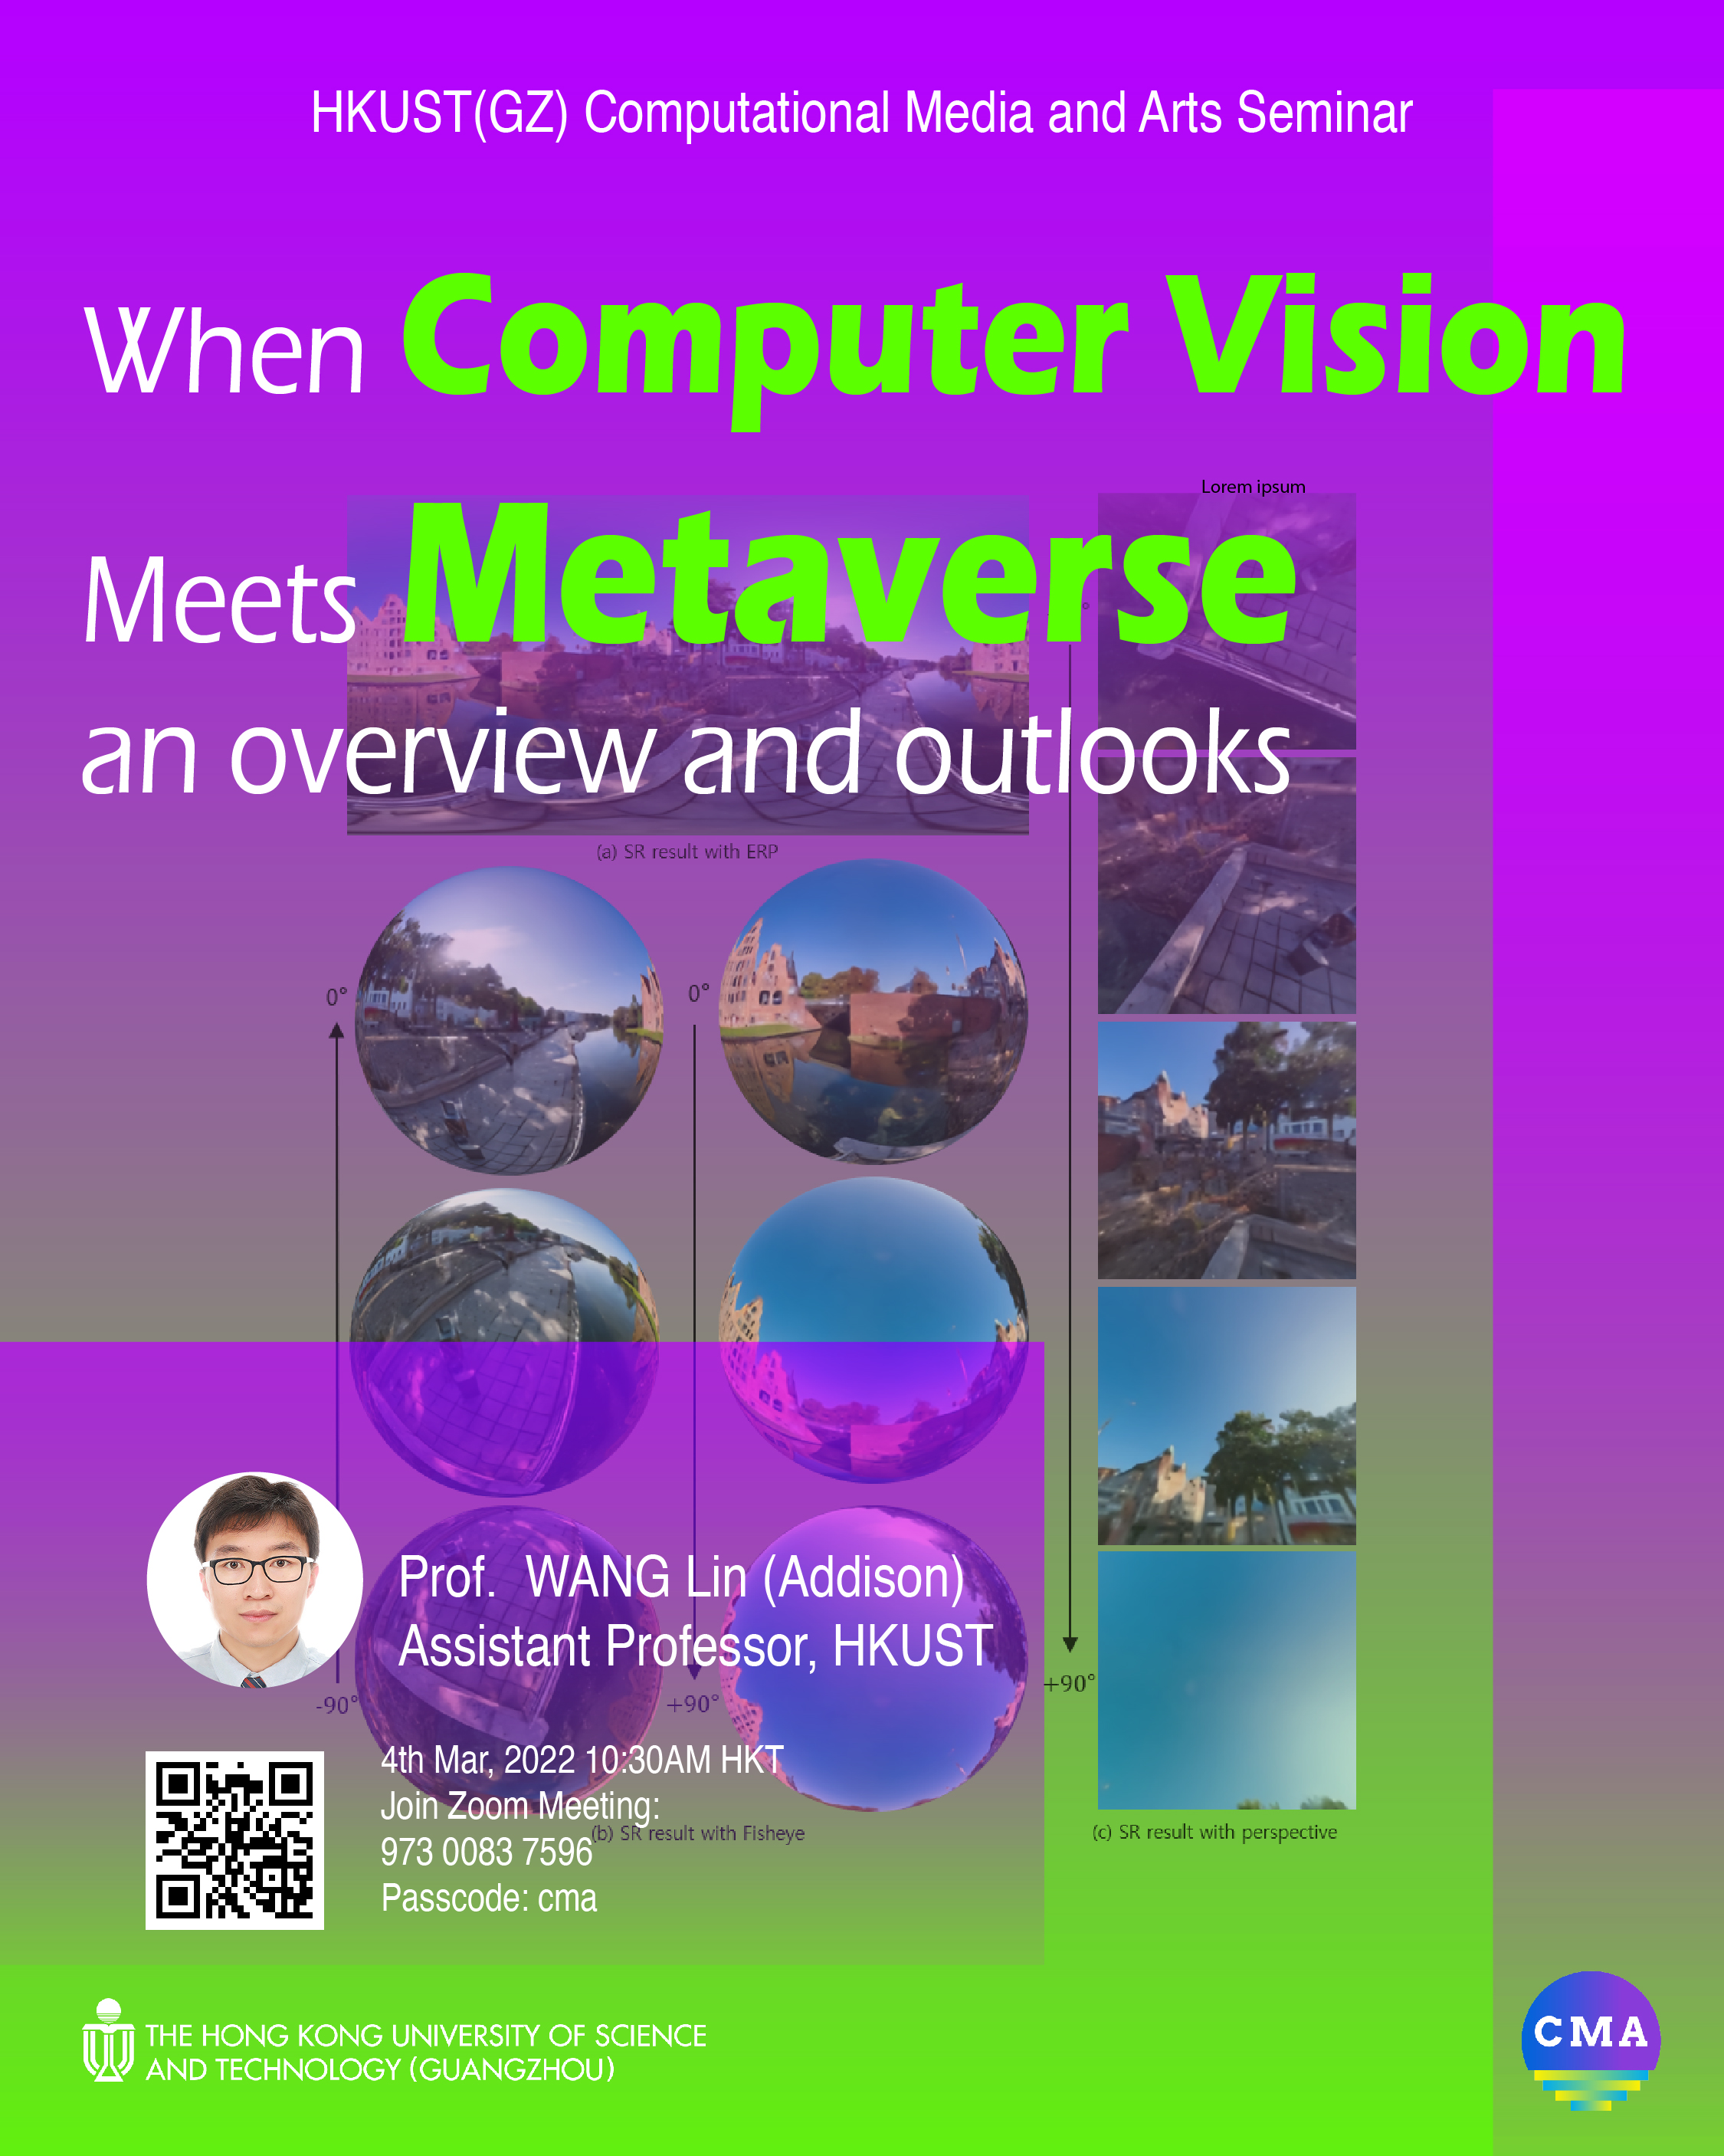 When Computer Vision Meets Metaverse: An Overview and Outlooks